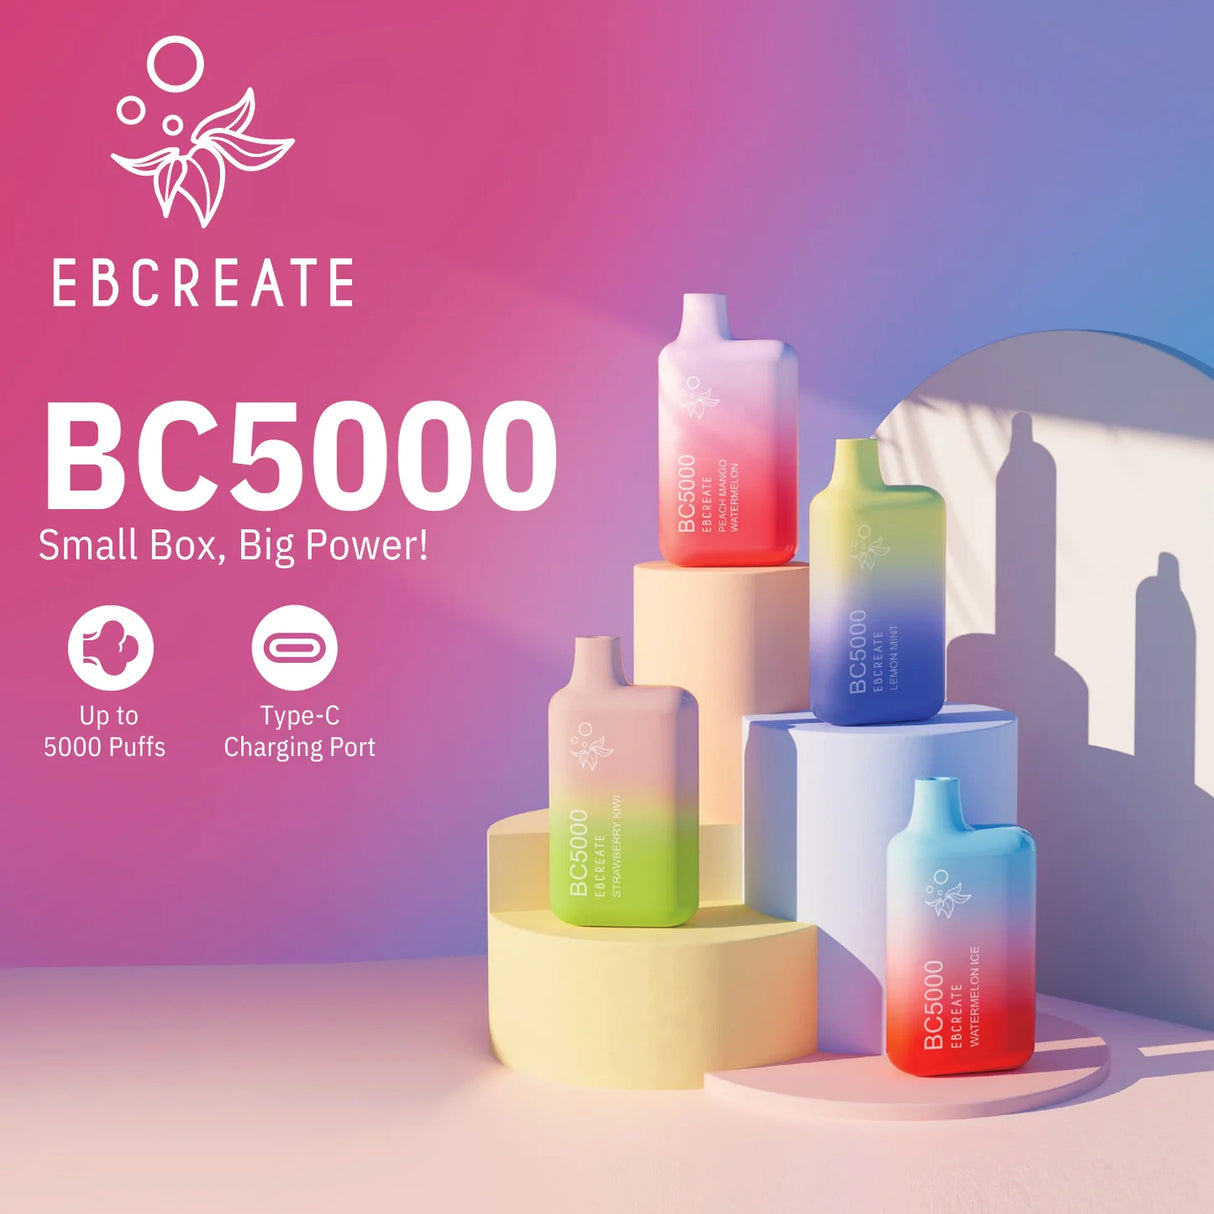 EBCREATE BC5000 Rechargeable Disposable Device 650mAh – 5000 Puffs